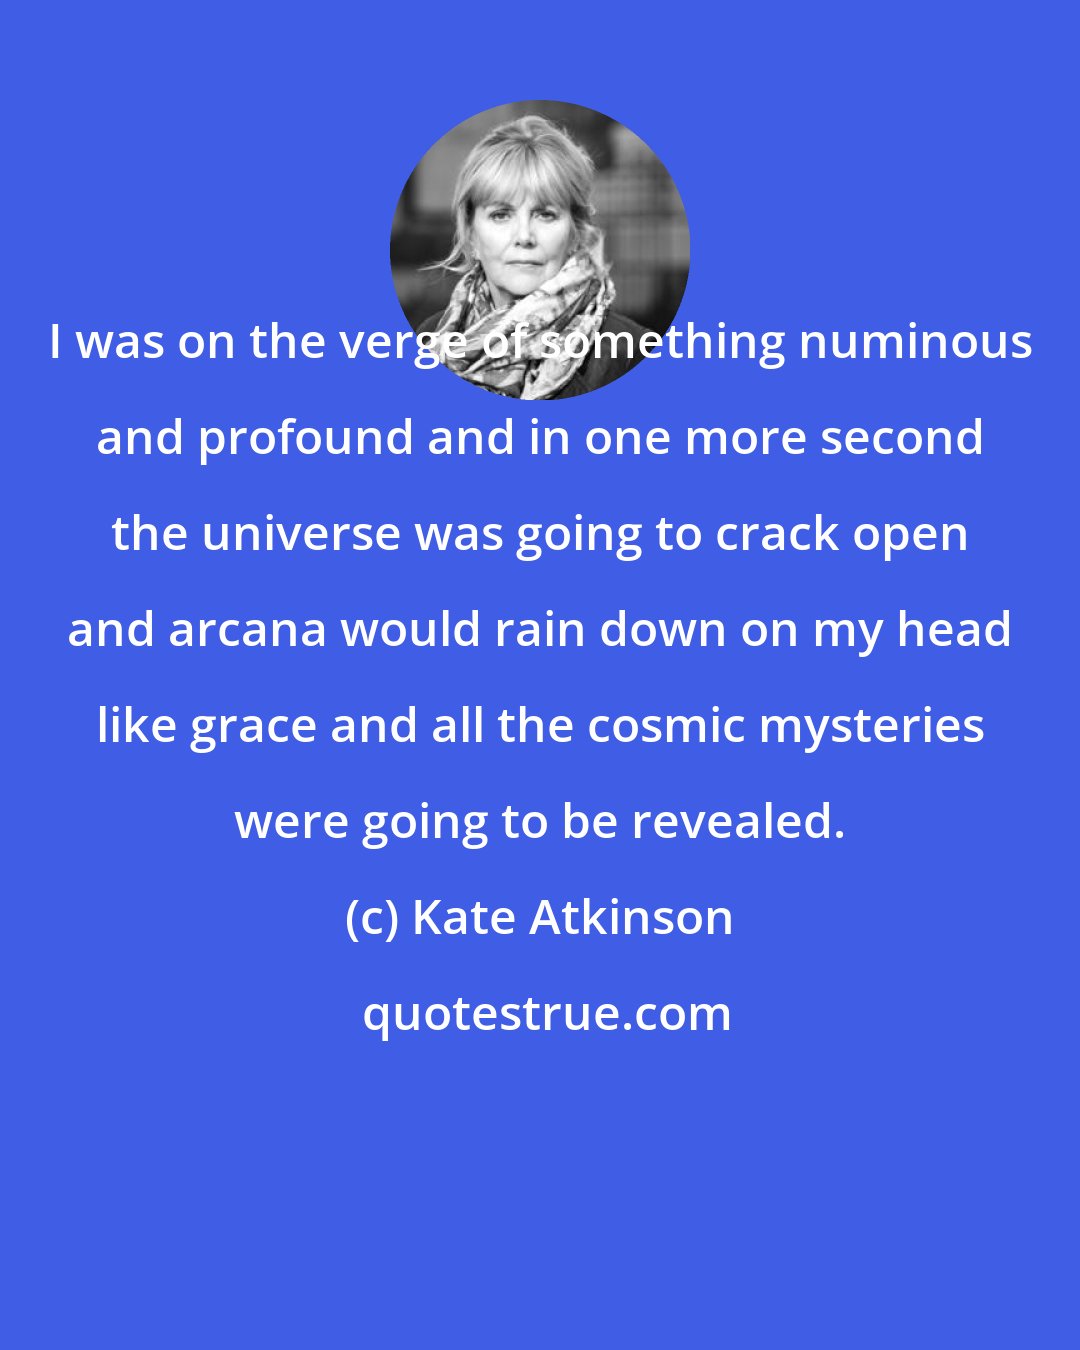 Kate Atkinson: I was on the verge of something numinous and profound and in one more second the universe was going to crack open and arcana would rain down on my head like grace and all the cosmic mysteries were going to be revealed.